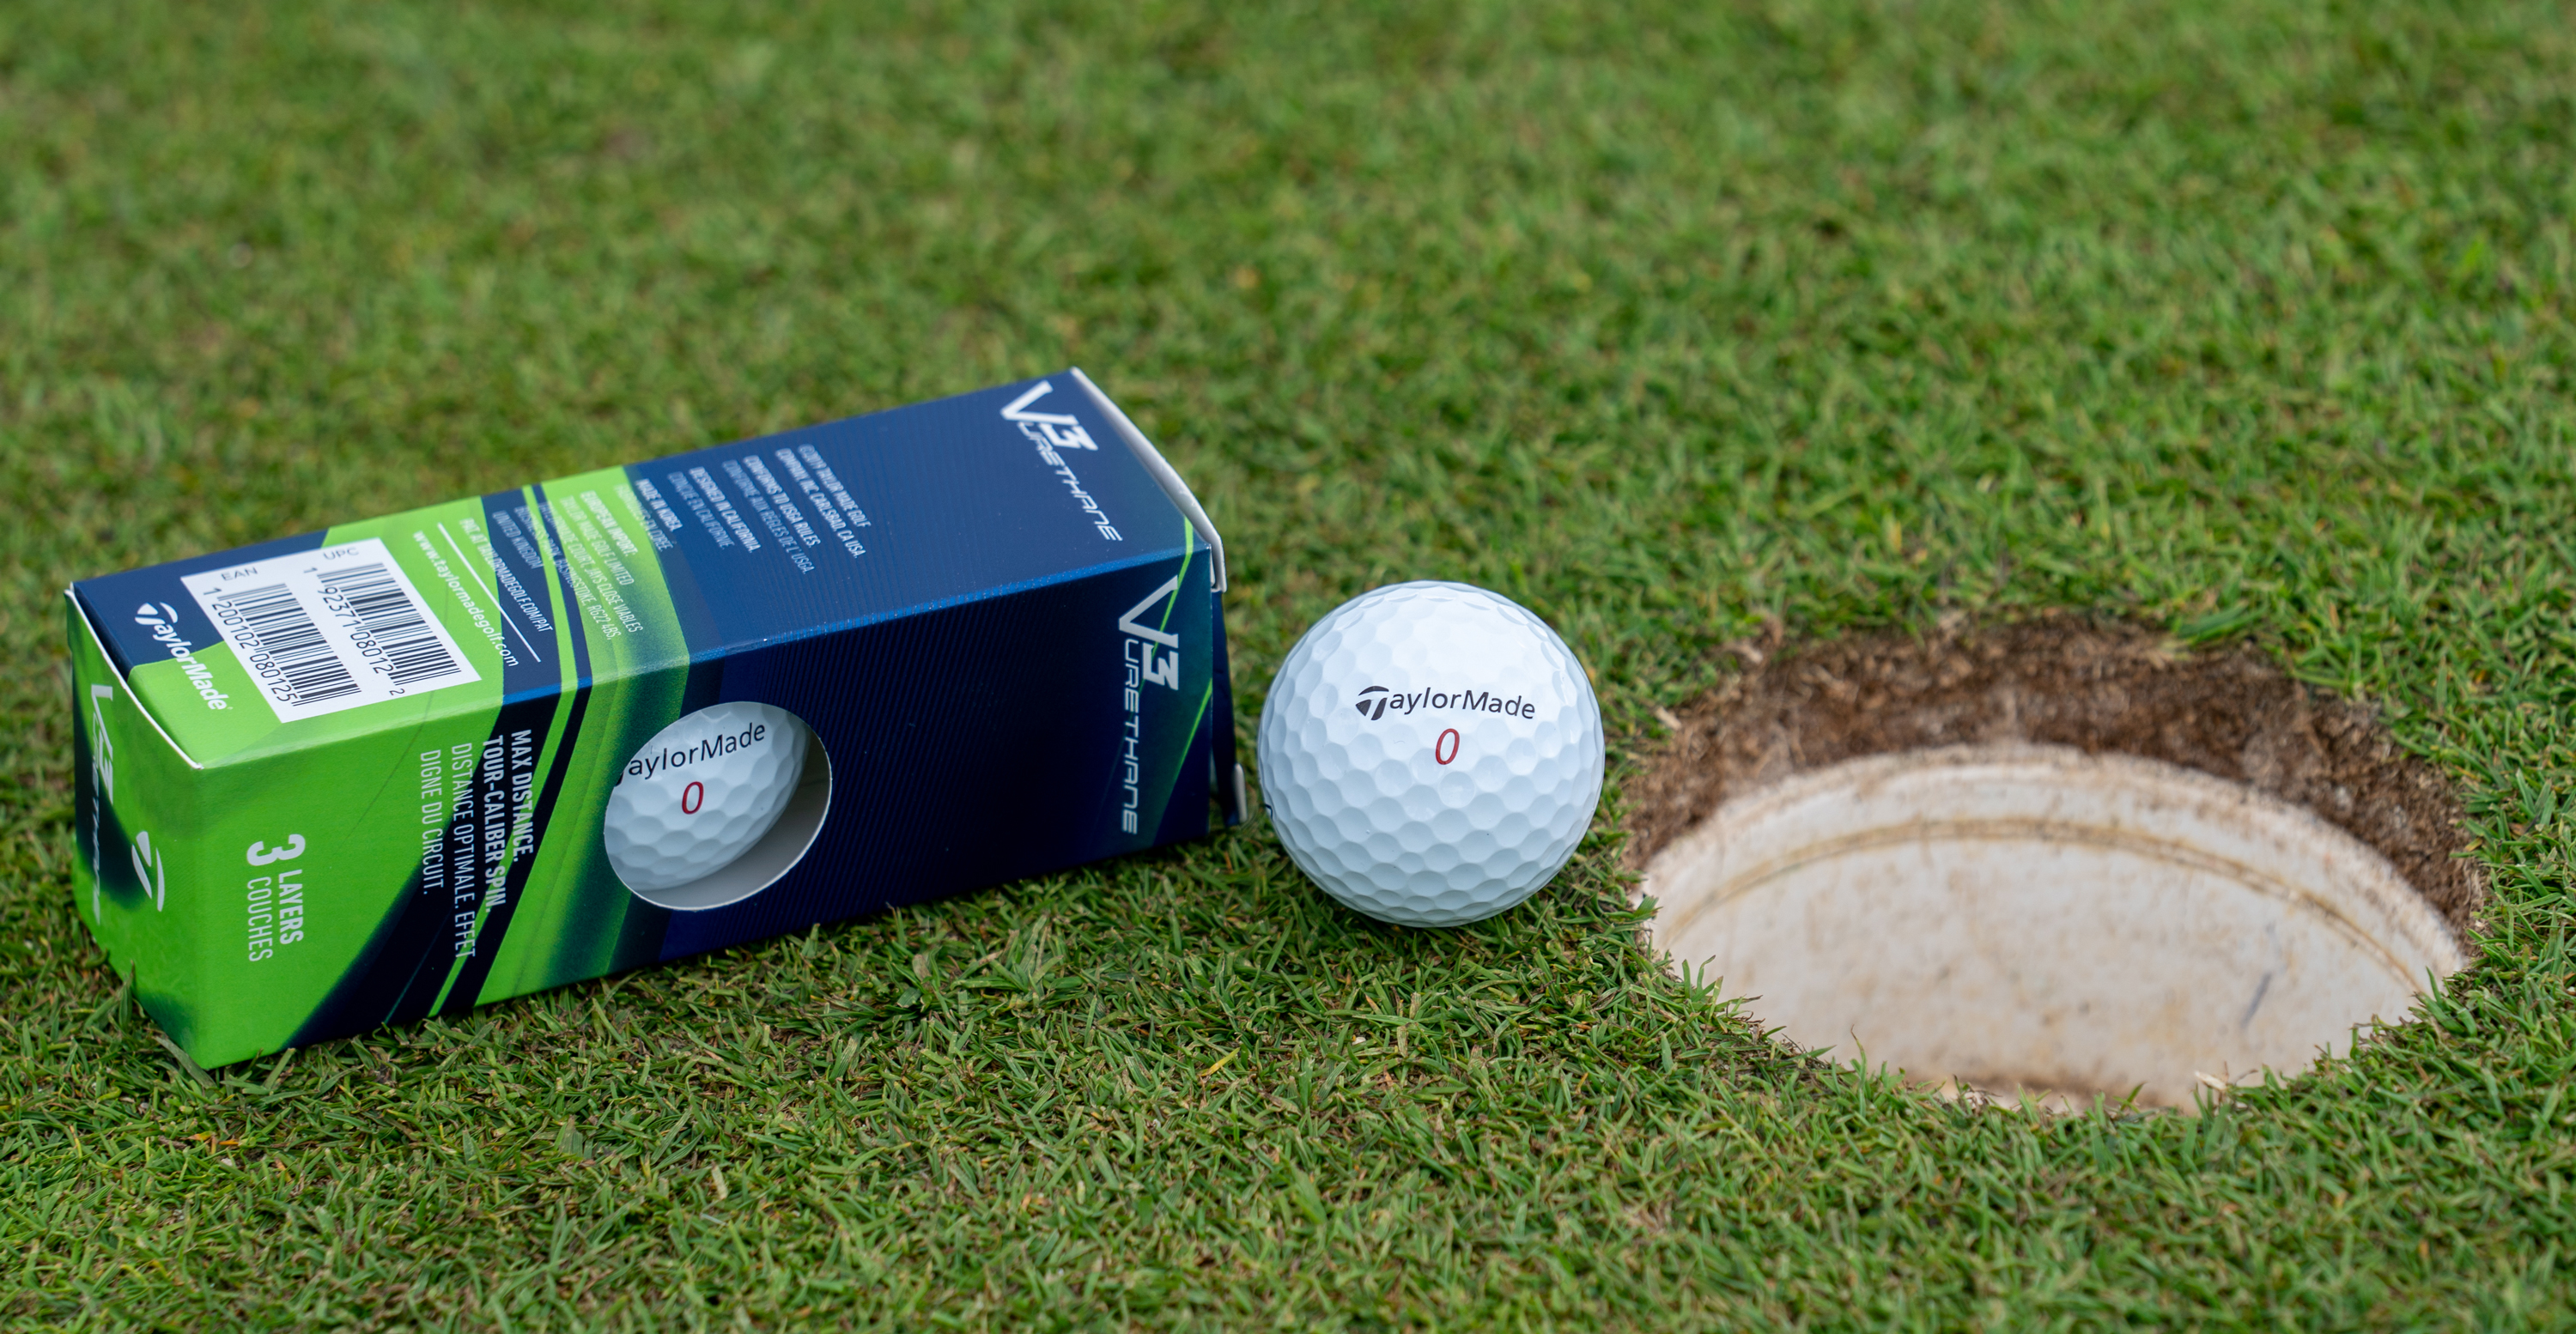 Old St Andrews Golf Ball Price & Reviews